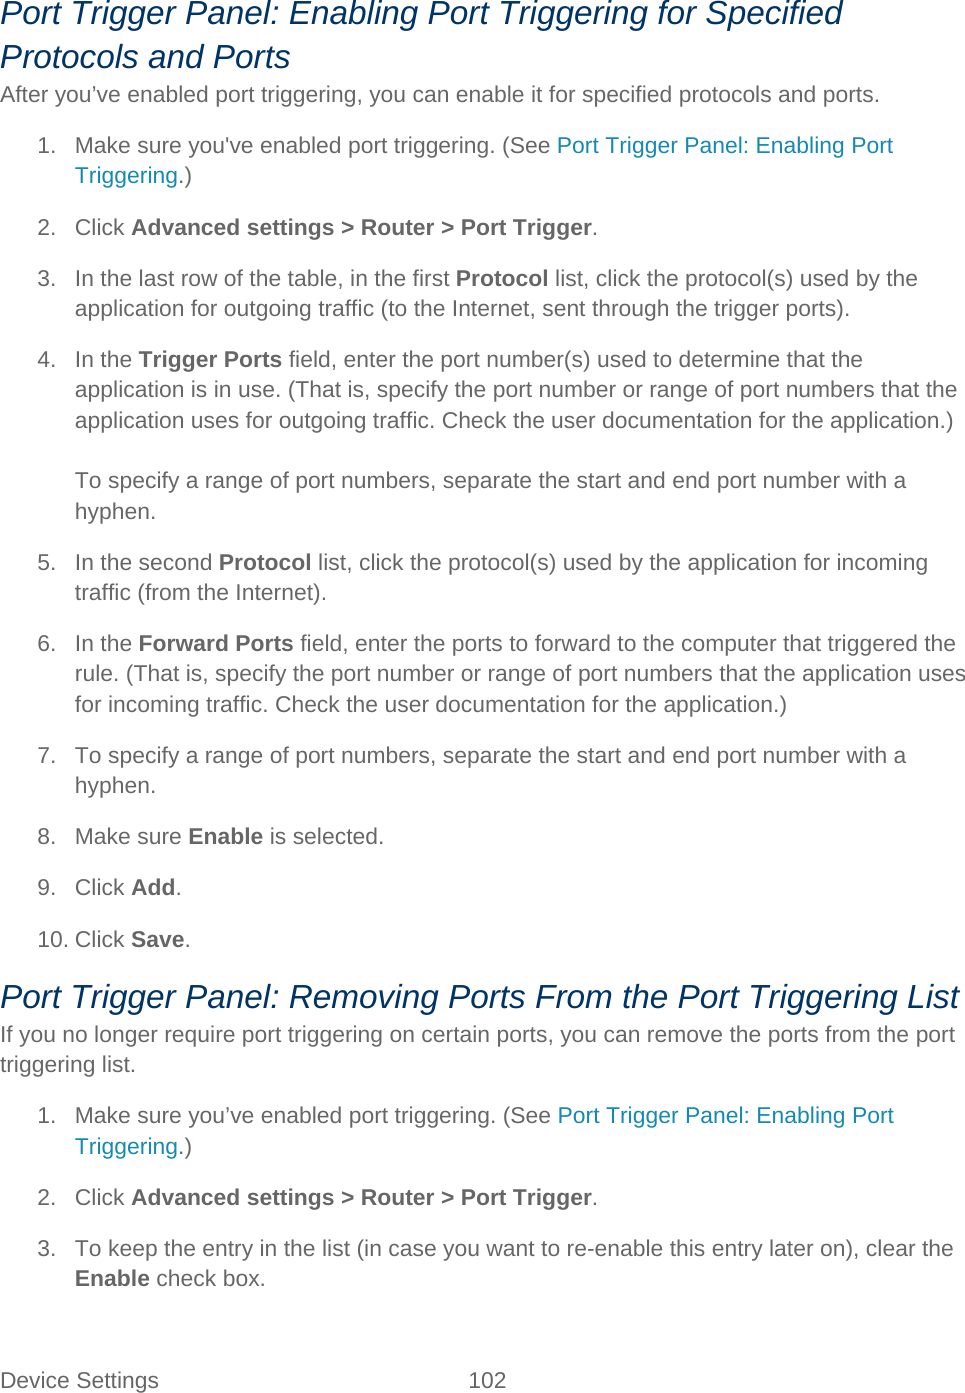 Device Settings 102   Port Trigger Panel: Enabling Port Triggering for Specified Protocols and Ports After you’ve enabled port triggering, you can enable it for specified protocols and ports. 1. Make sure you&apos;ve enabled port triggering. (See Port Trigger Panel: Enabling Port Triggering.) 2. Click Advanced settings &gt; Router &gt; Port Trigger. 3. In the last row of the table, in the first Protocol list, click the protocol(s) used by the application for outgoing traffic (to the Internet, sent through the trigger ports). 4. In the Trigger Ports field, enter the port number(s) used to determine that the application is in use. (That is, specify the port number or range of port numbers that the application uses for outgoing traffic. Check the user documentation for the application.)  To specify a range of port numbers, separate the start and end port number with a hyphen. 5. In the second Protocol list, click the protocol(s) used by the application for incoming traffic (from the Internet). 6. In the Forward Ports field, enter the ports to forward to the computer that triggered the rule. (That is, specify the port number or range of port numbers that the application uses for incoming traffic. Check the user documentation for the application.) 7. To specify a range of port numbers, separate the start and end port number with a hyphen. 8. Make sure Enable is selected. 9. Click Add. 10. Click Save. Port Trigger Panel: Removing Ports From the Port Triggering List If you no longer require port triggering on certain ports, you can remove the ports from the port triggering list. 1. Make sure you’ve enabled port triggering. (See Port Trigger Panel: Enabling Port Triggering.) 2. Click Advanced settings &gt; Router &gt; Port Trigger. 3. To keep the entry in the list (in case you want to re-enable this entry later on), clear the Enable check box.  